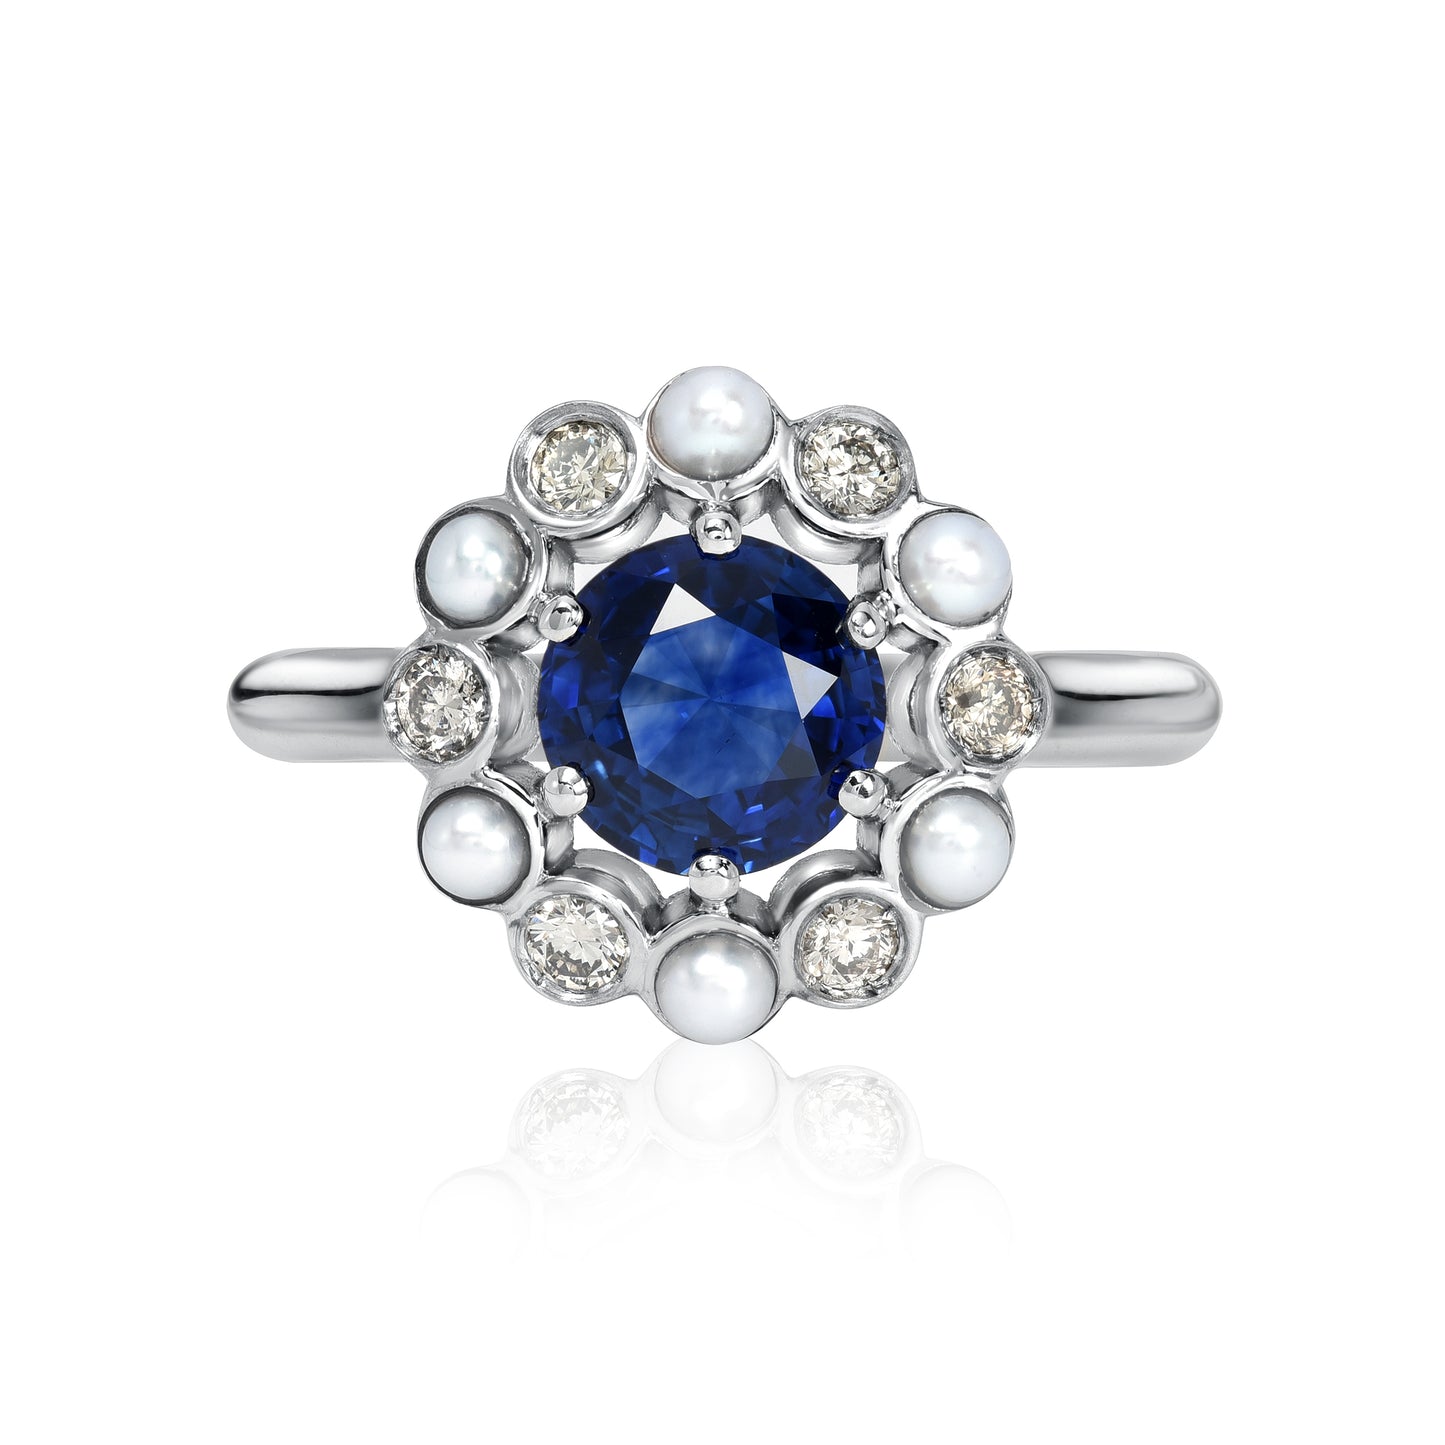 Flor de Oro with Sapphire, Champagne Diamond and Pearl